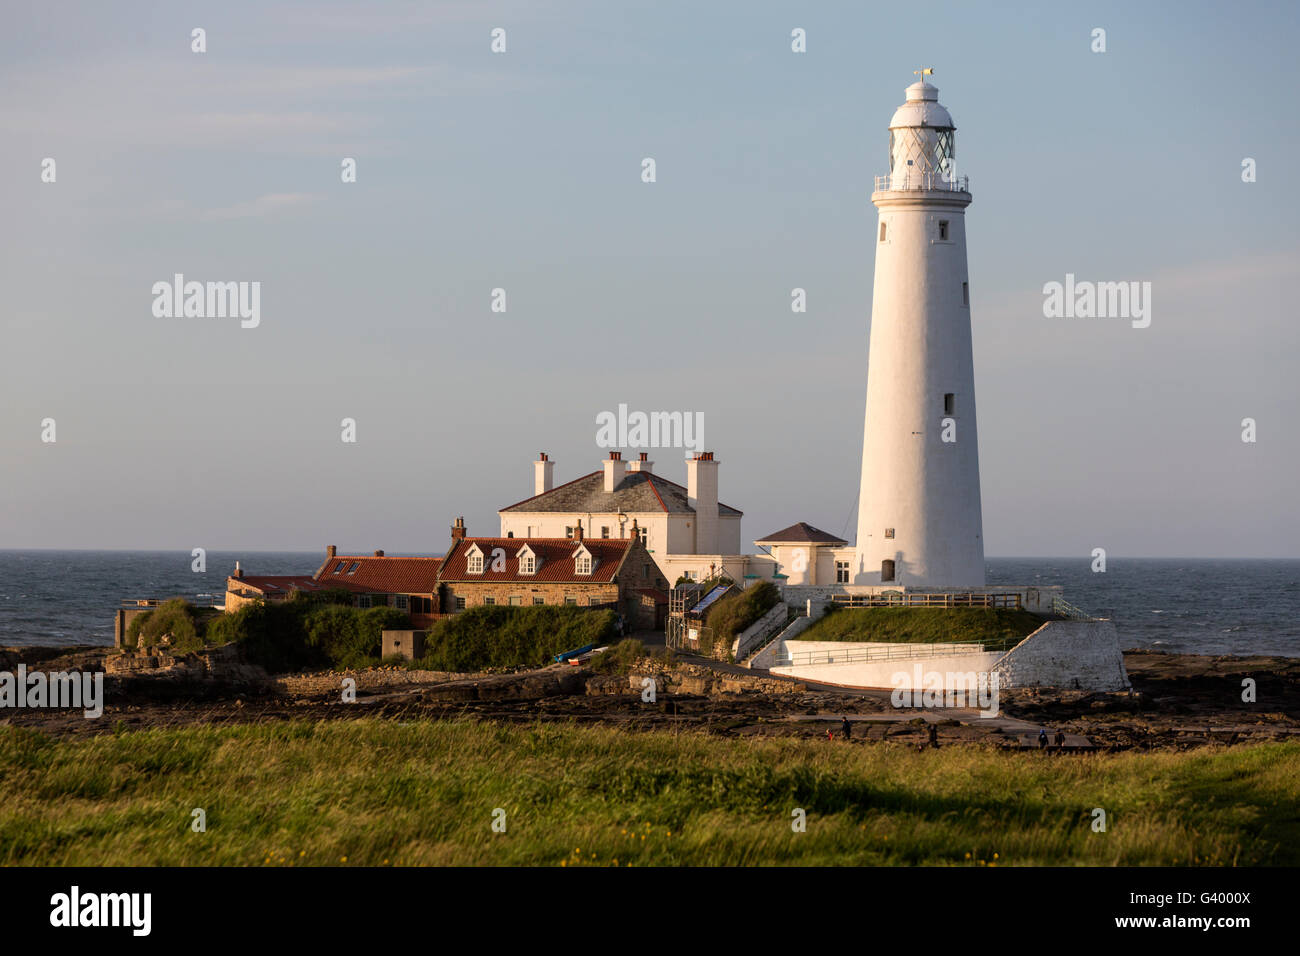 St. Mary's Lighthouse in St Mary's Island with cottages, Tyne and Wear, England, UK Stock Photo